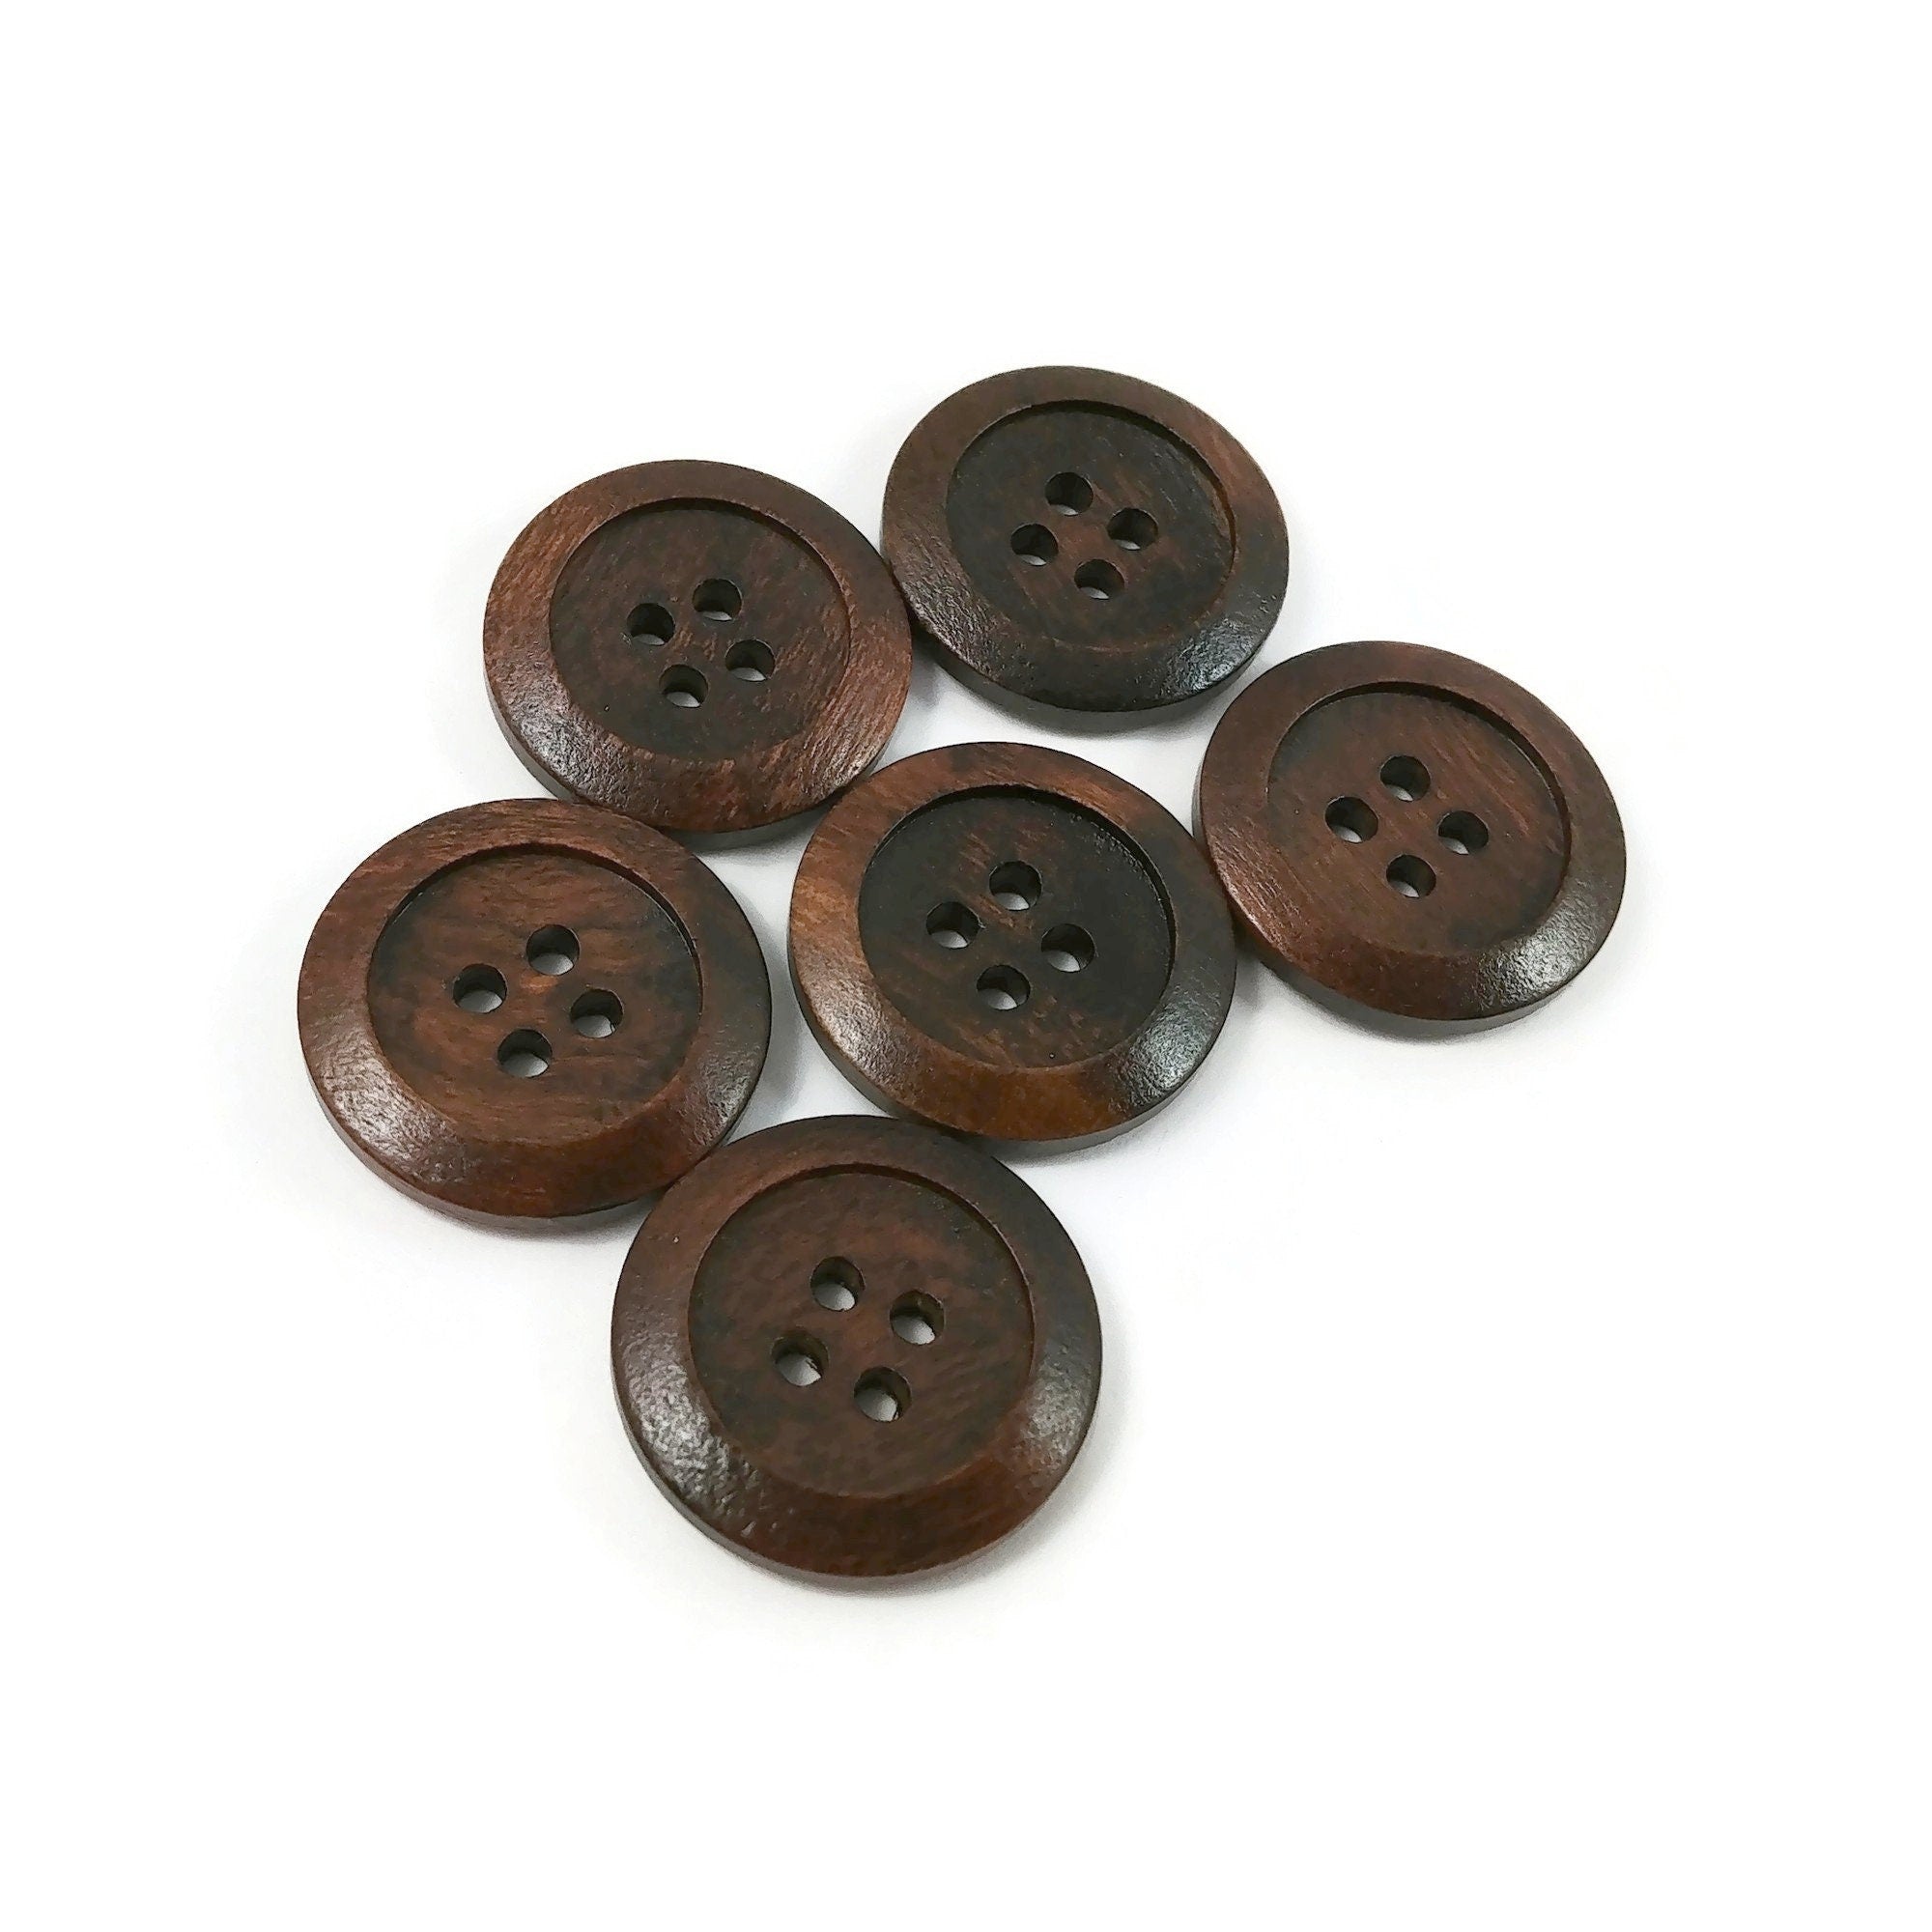 Olive natural wood buttons, 15mm, 20mm, Classic walnut sewing buttons, Made in Italy